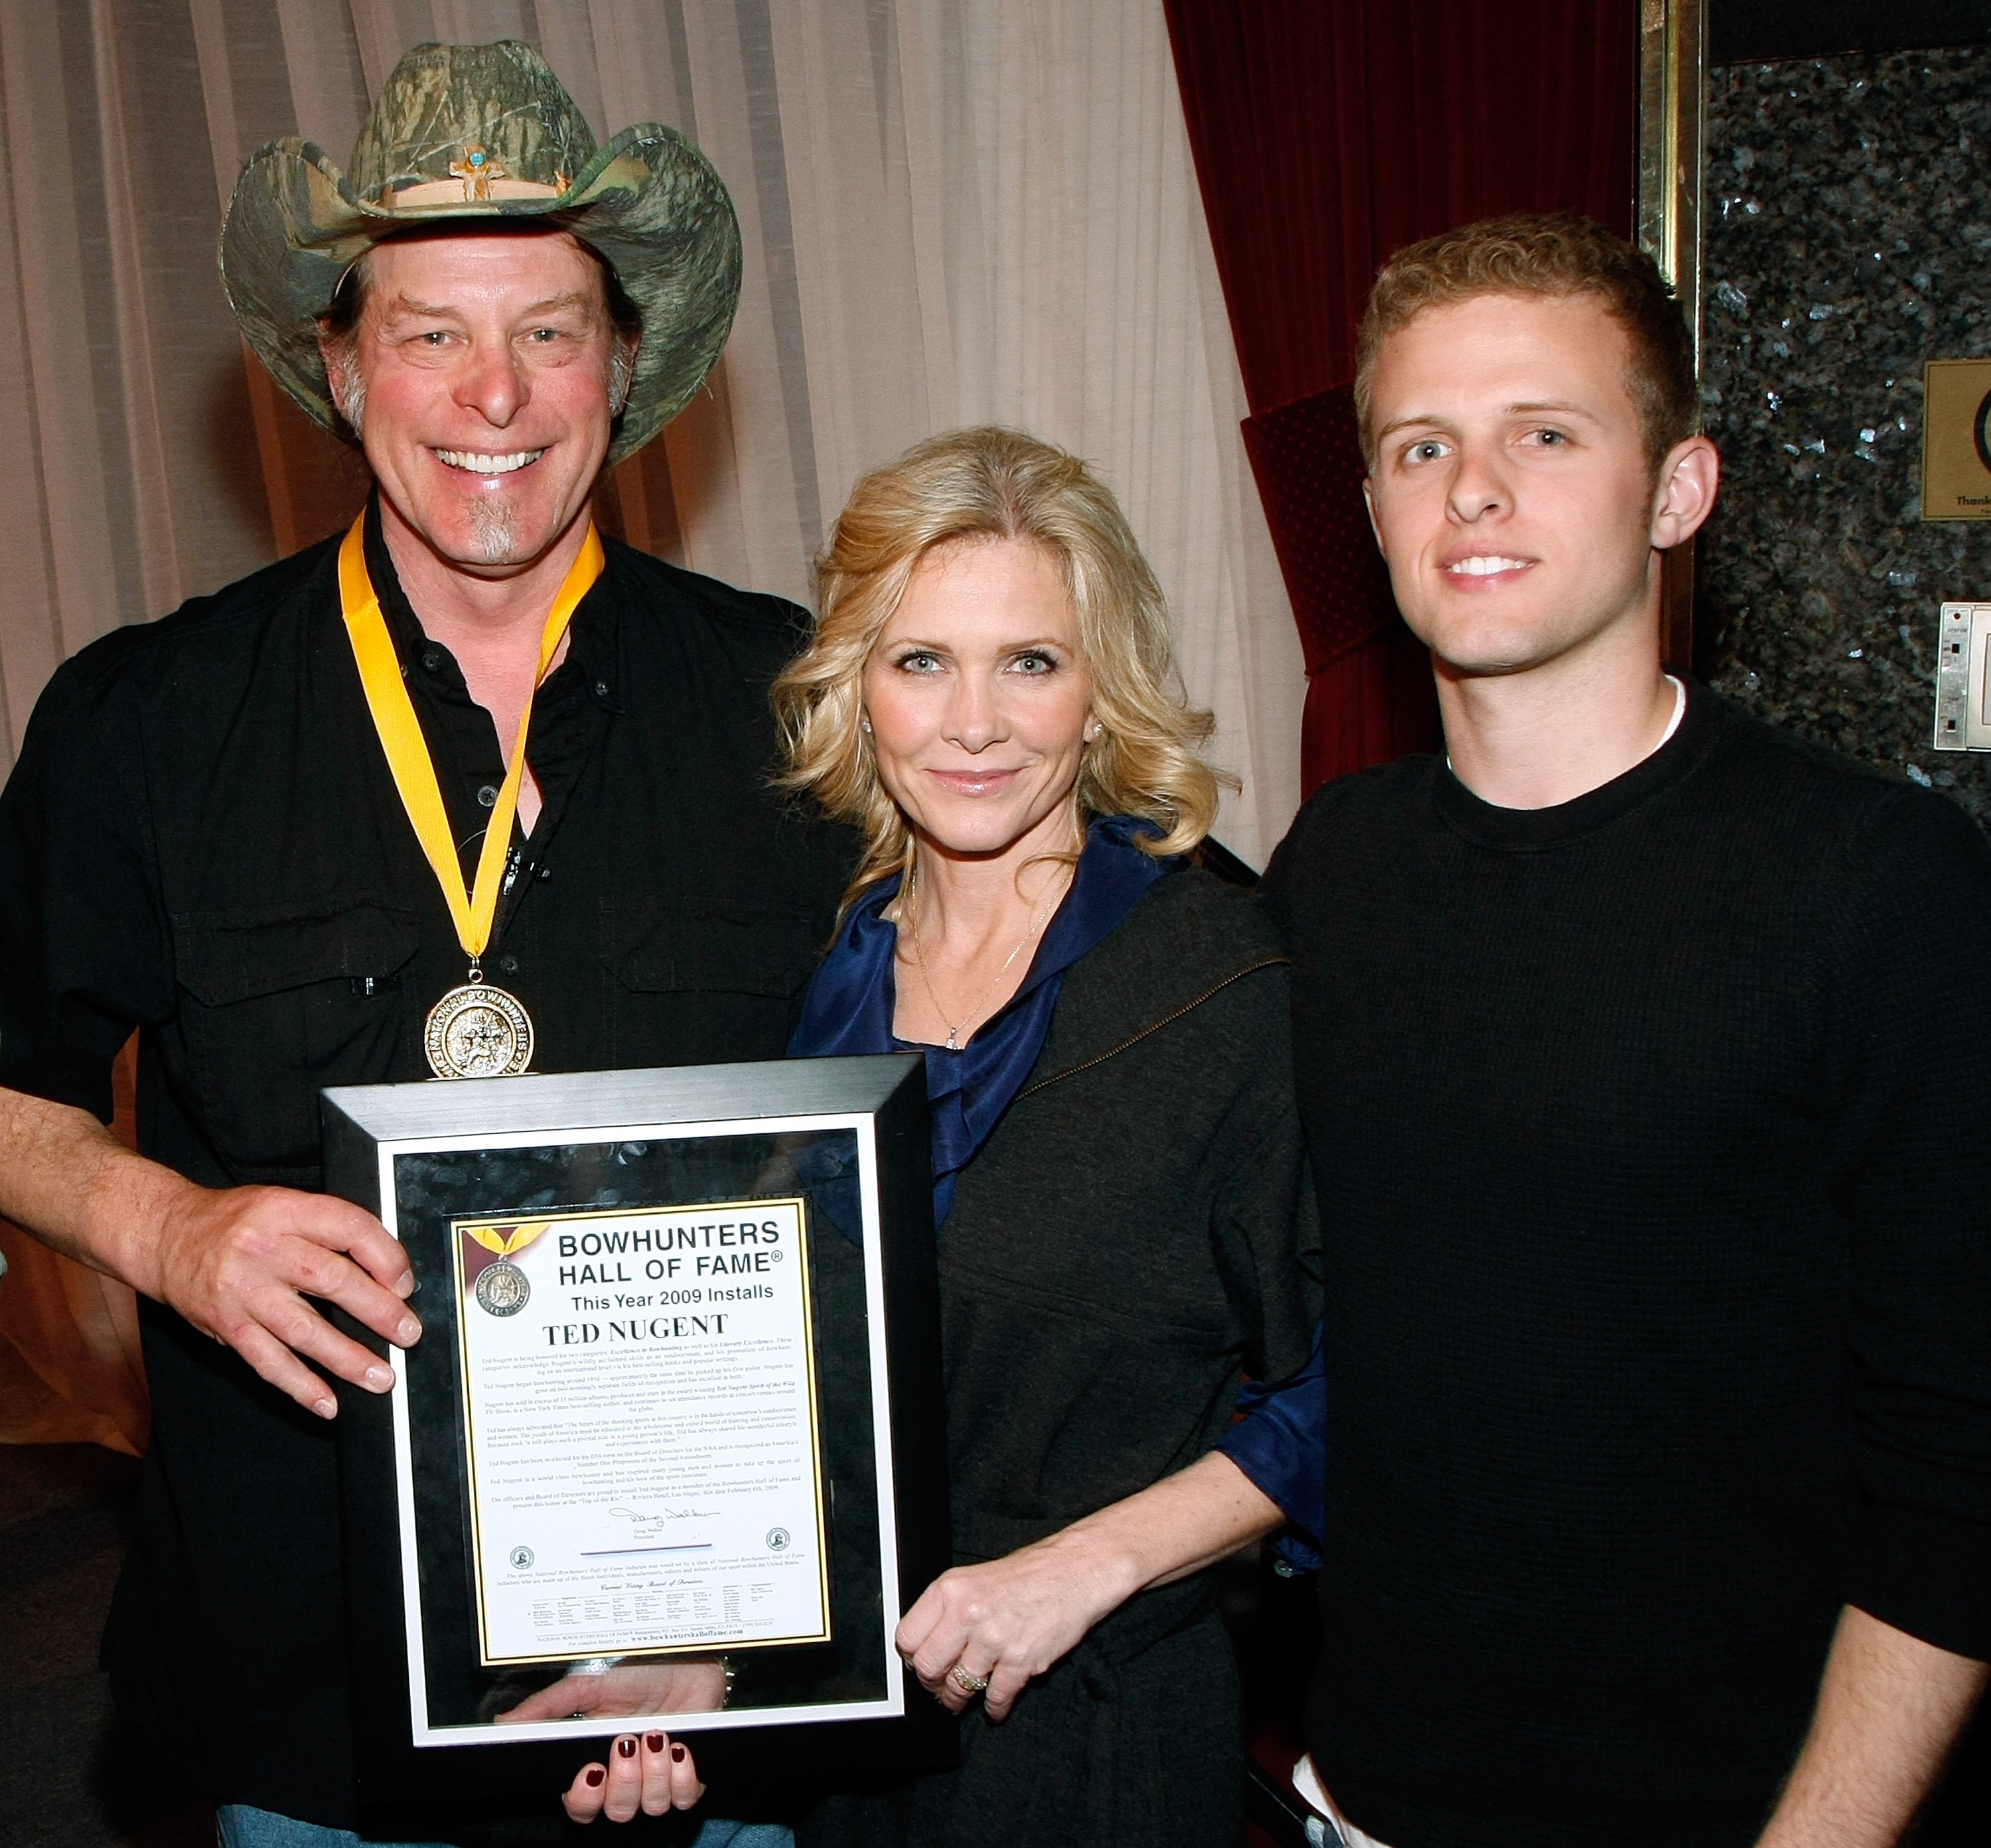 Music artist Ted Nugent, his wife Shemane Nugent and son Rocco Nugent appear after Ted Nugent was inducted into the National Bowhunters Hall of Fame at the Riviera Hotel & Casino February 6, 2009, in Las Vegas, Nevada. | Source: Getty Images